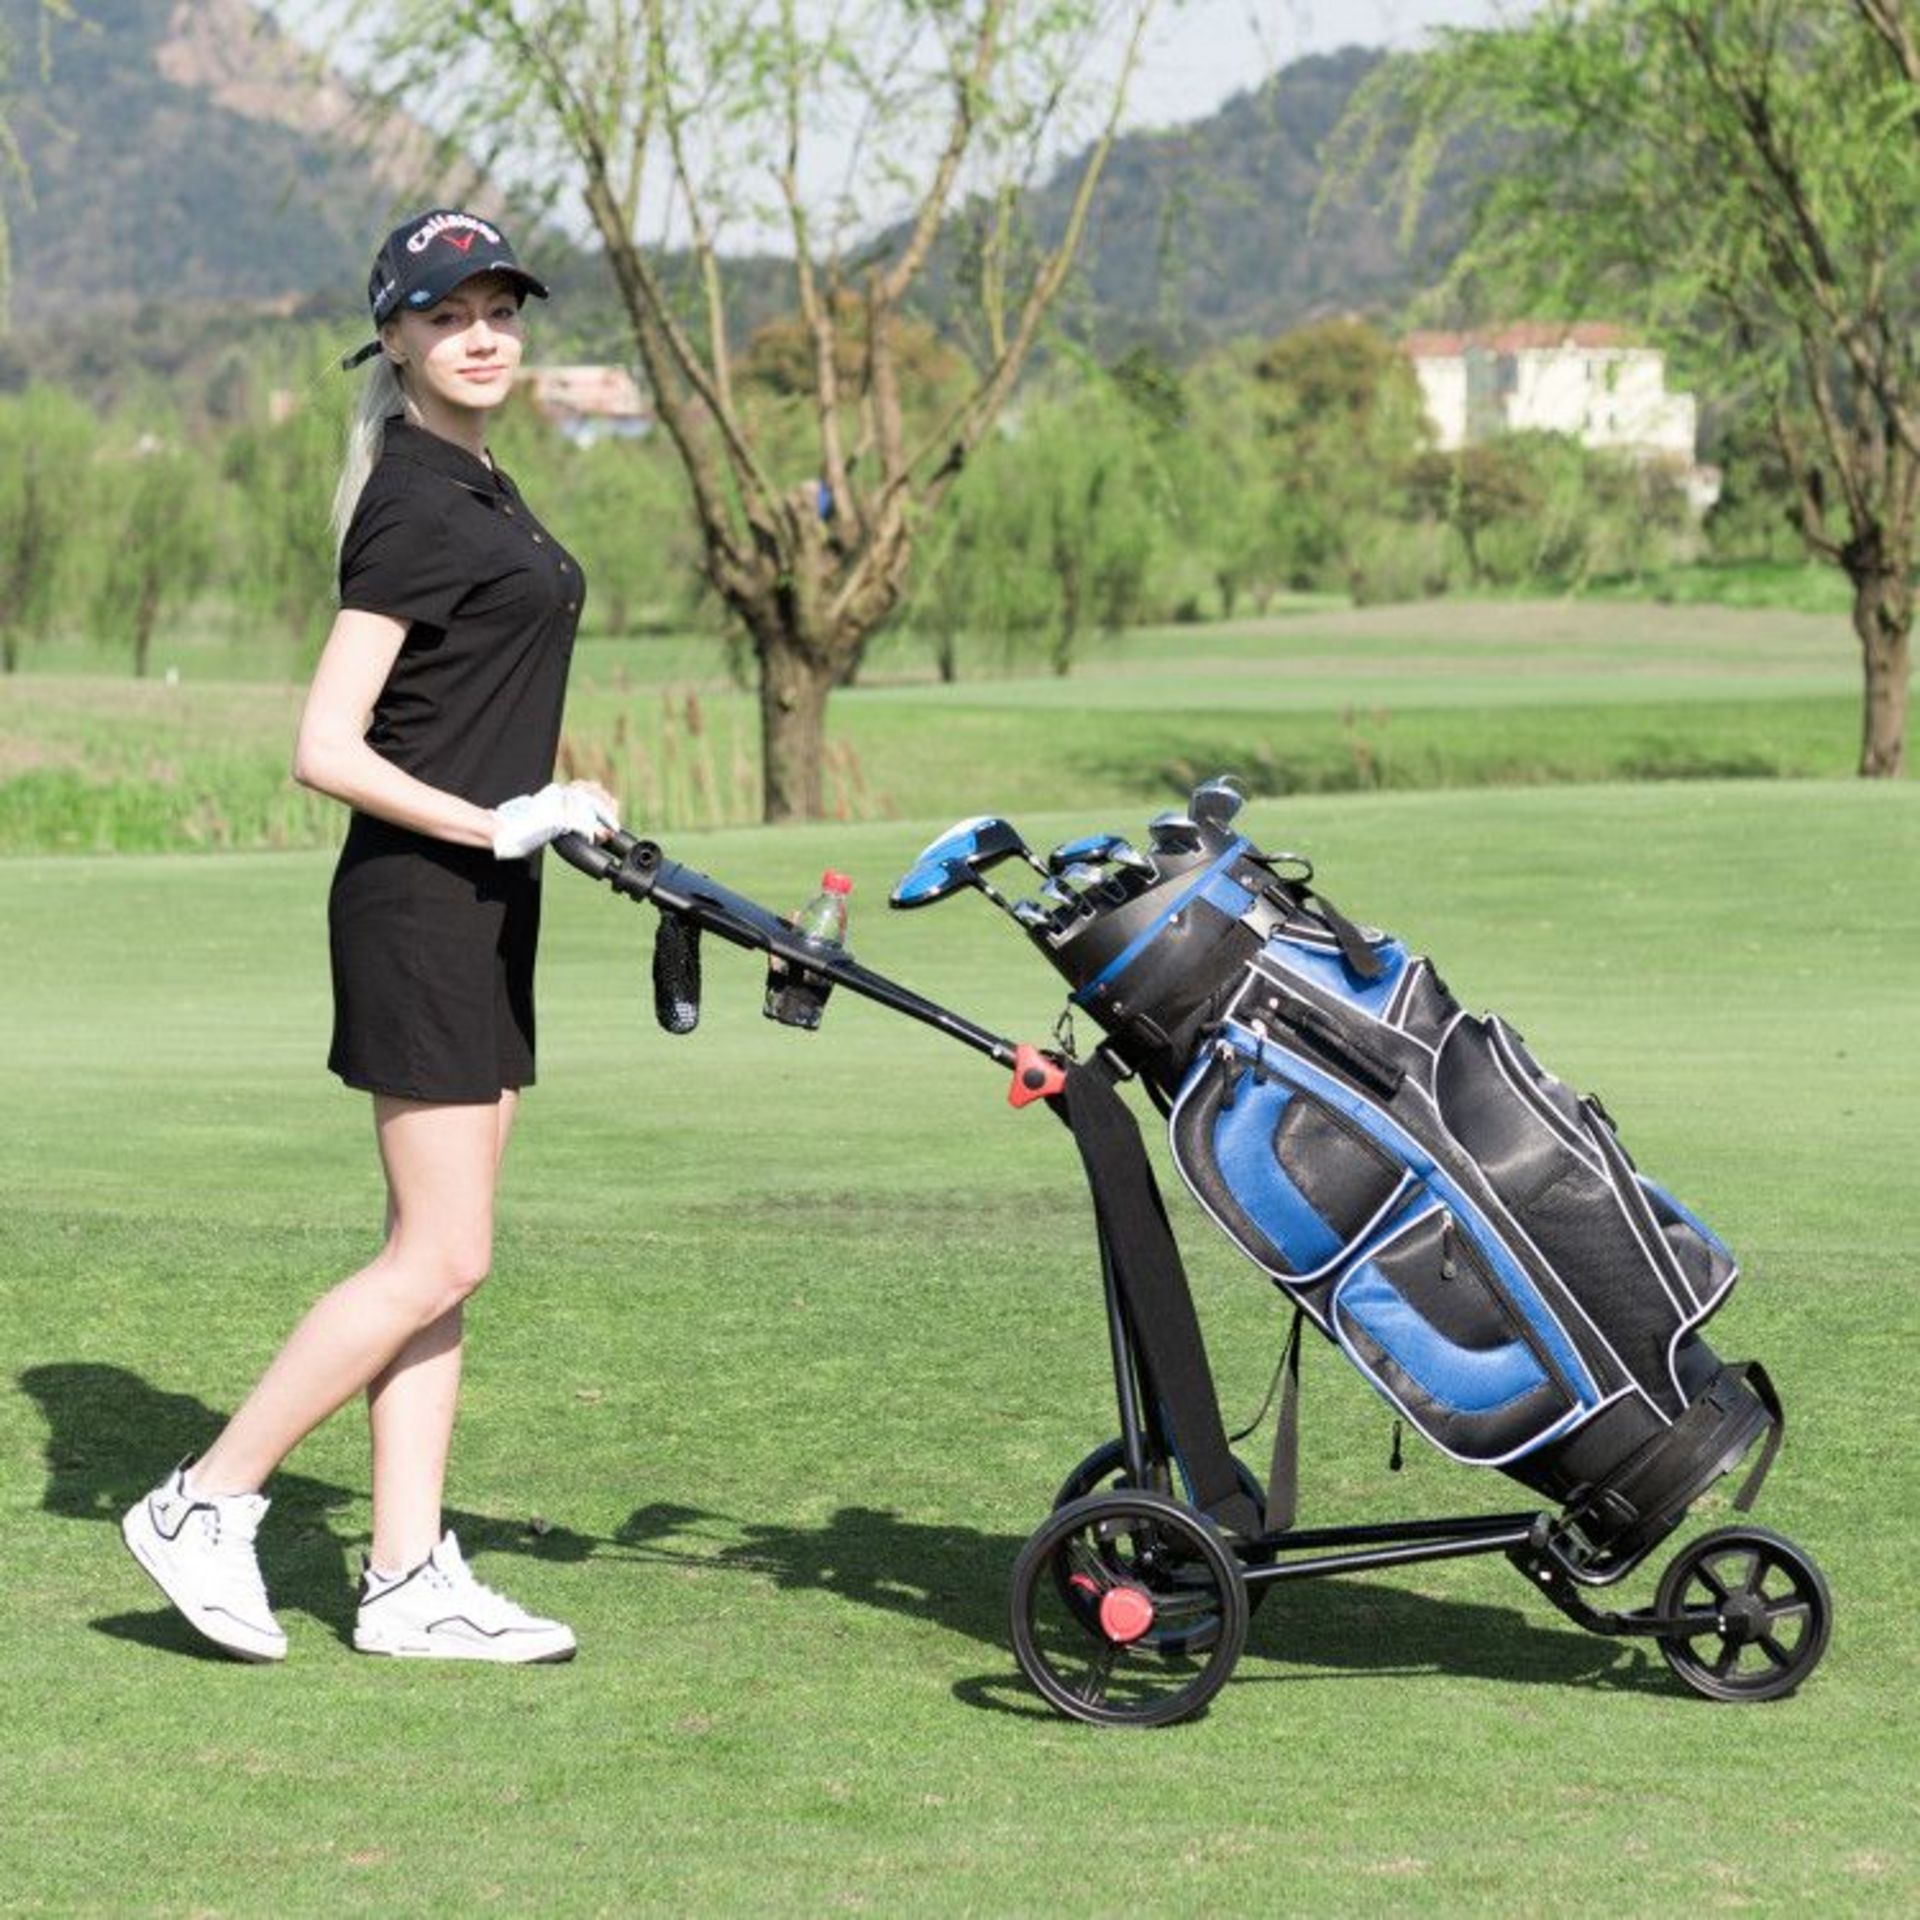 3 Wheel Durable Foldable Steel Golf Cart with Mesh Bag. - ER53. Golf push cart can be folded